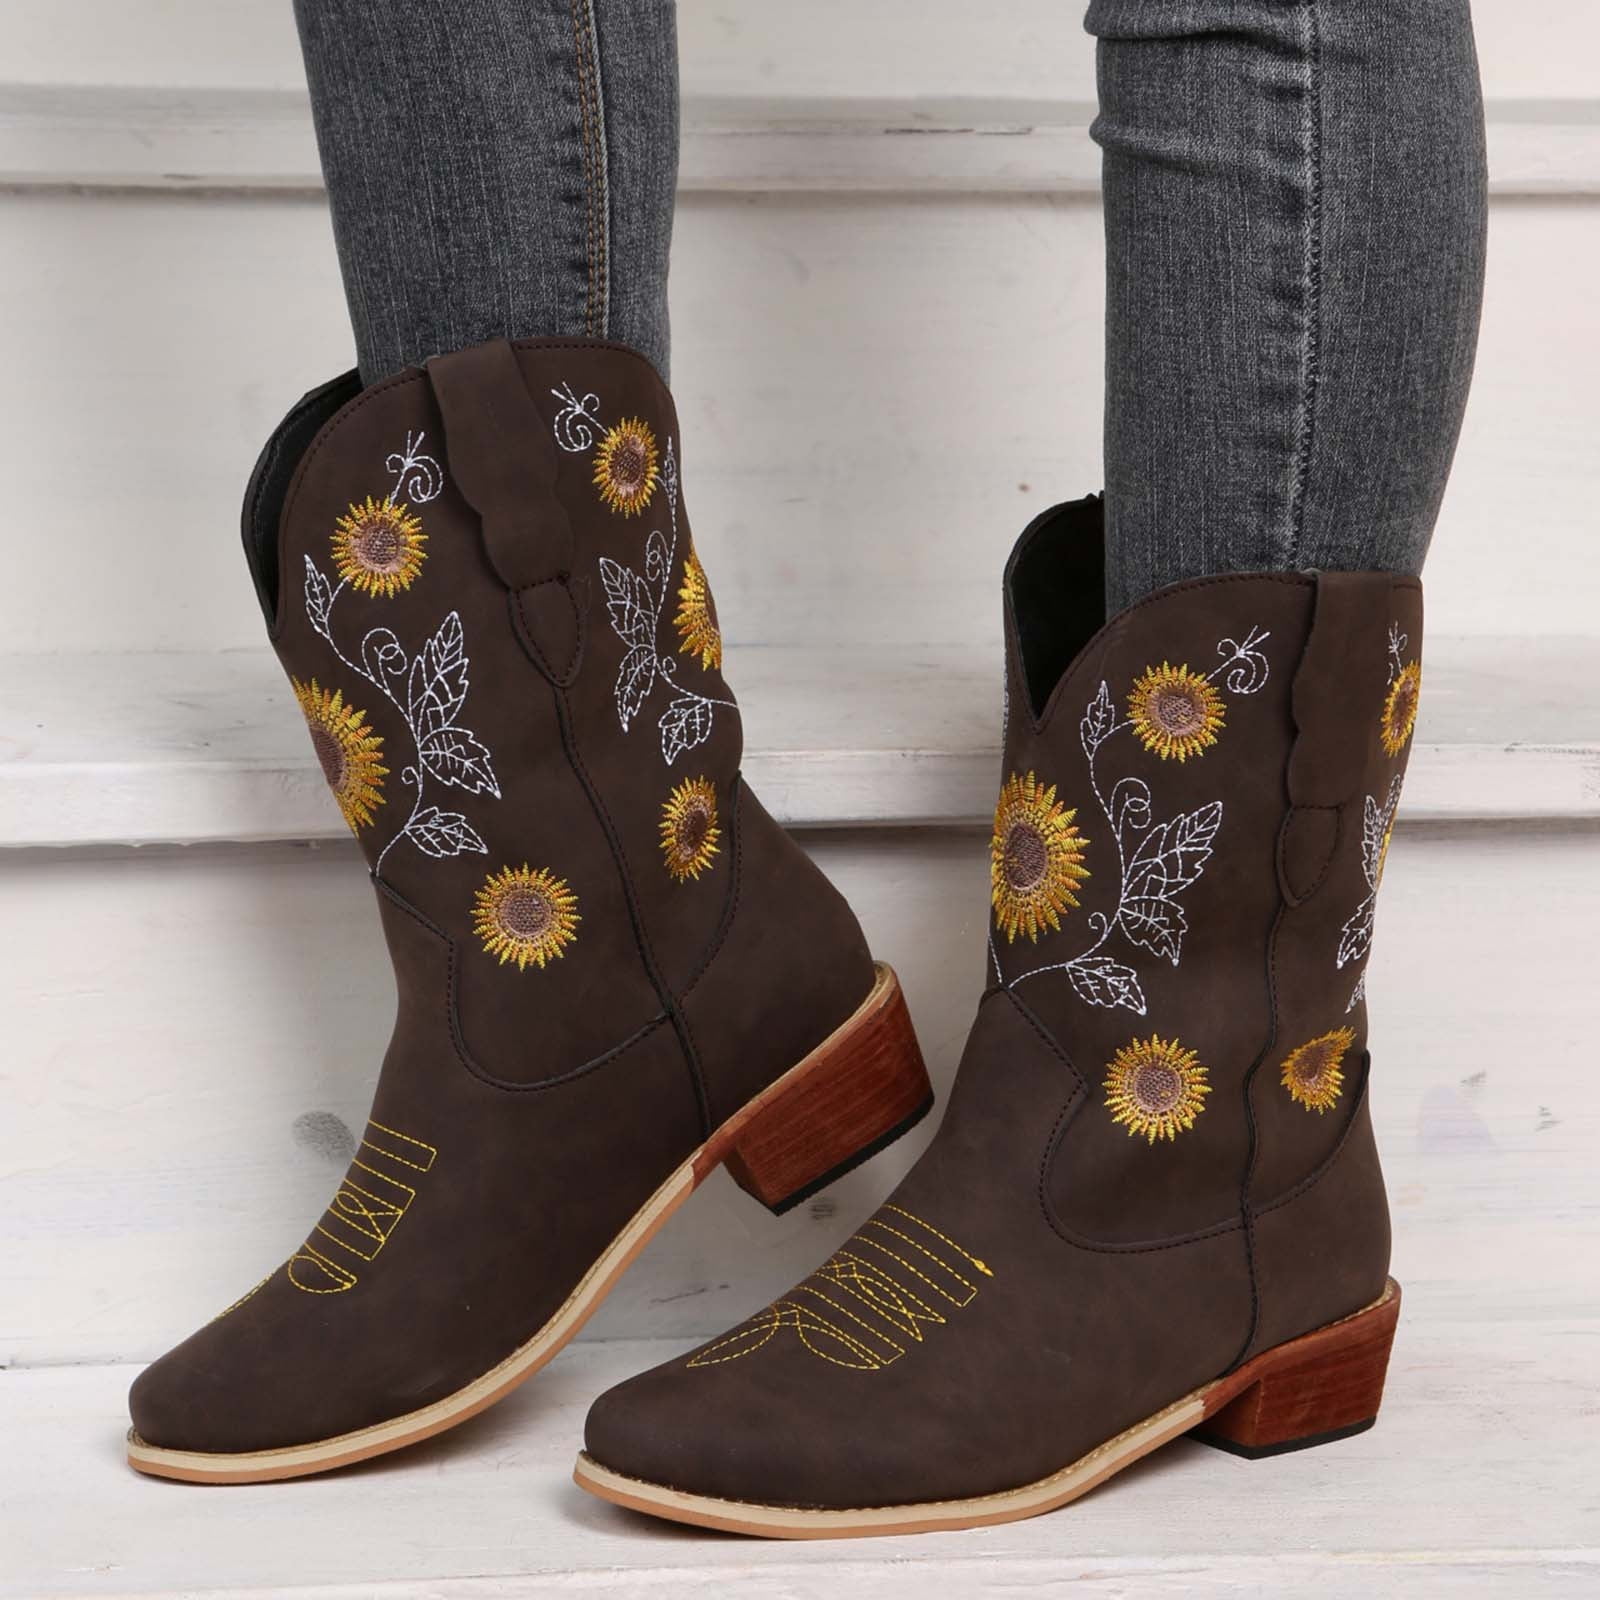 Boots for Women Western Boots Sunflowers Cowboy Boots for Women Mid Calf Chunky Heel Retro Square Toe Pull On Boots 